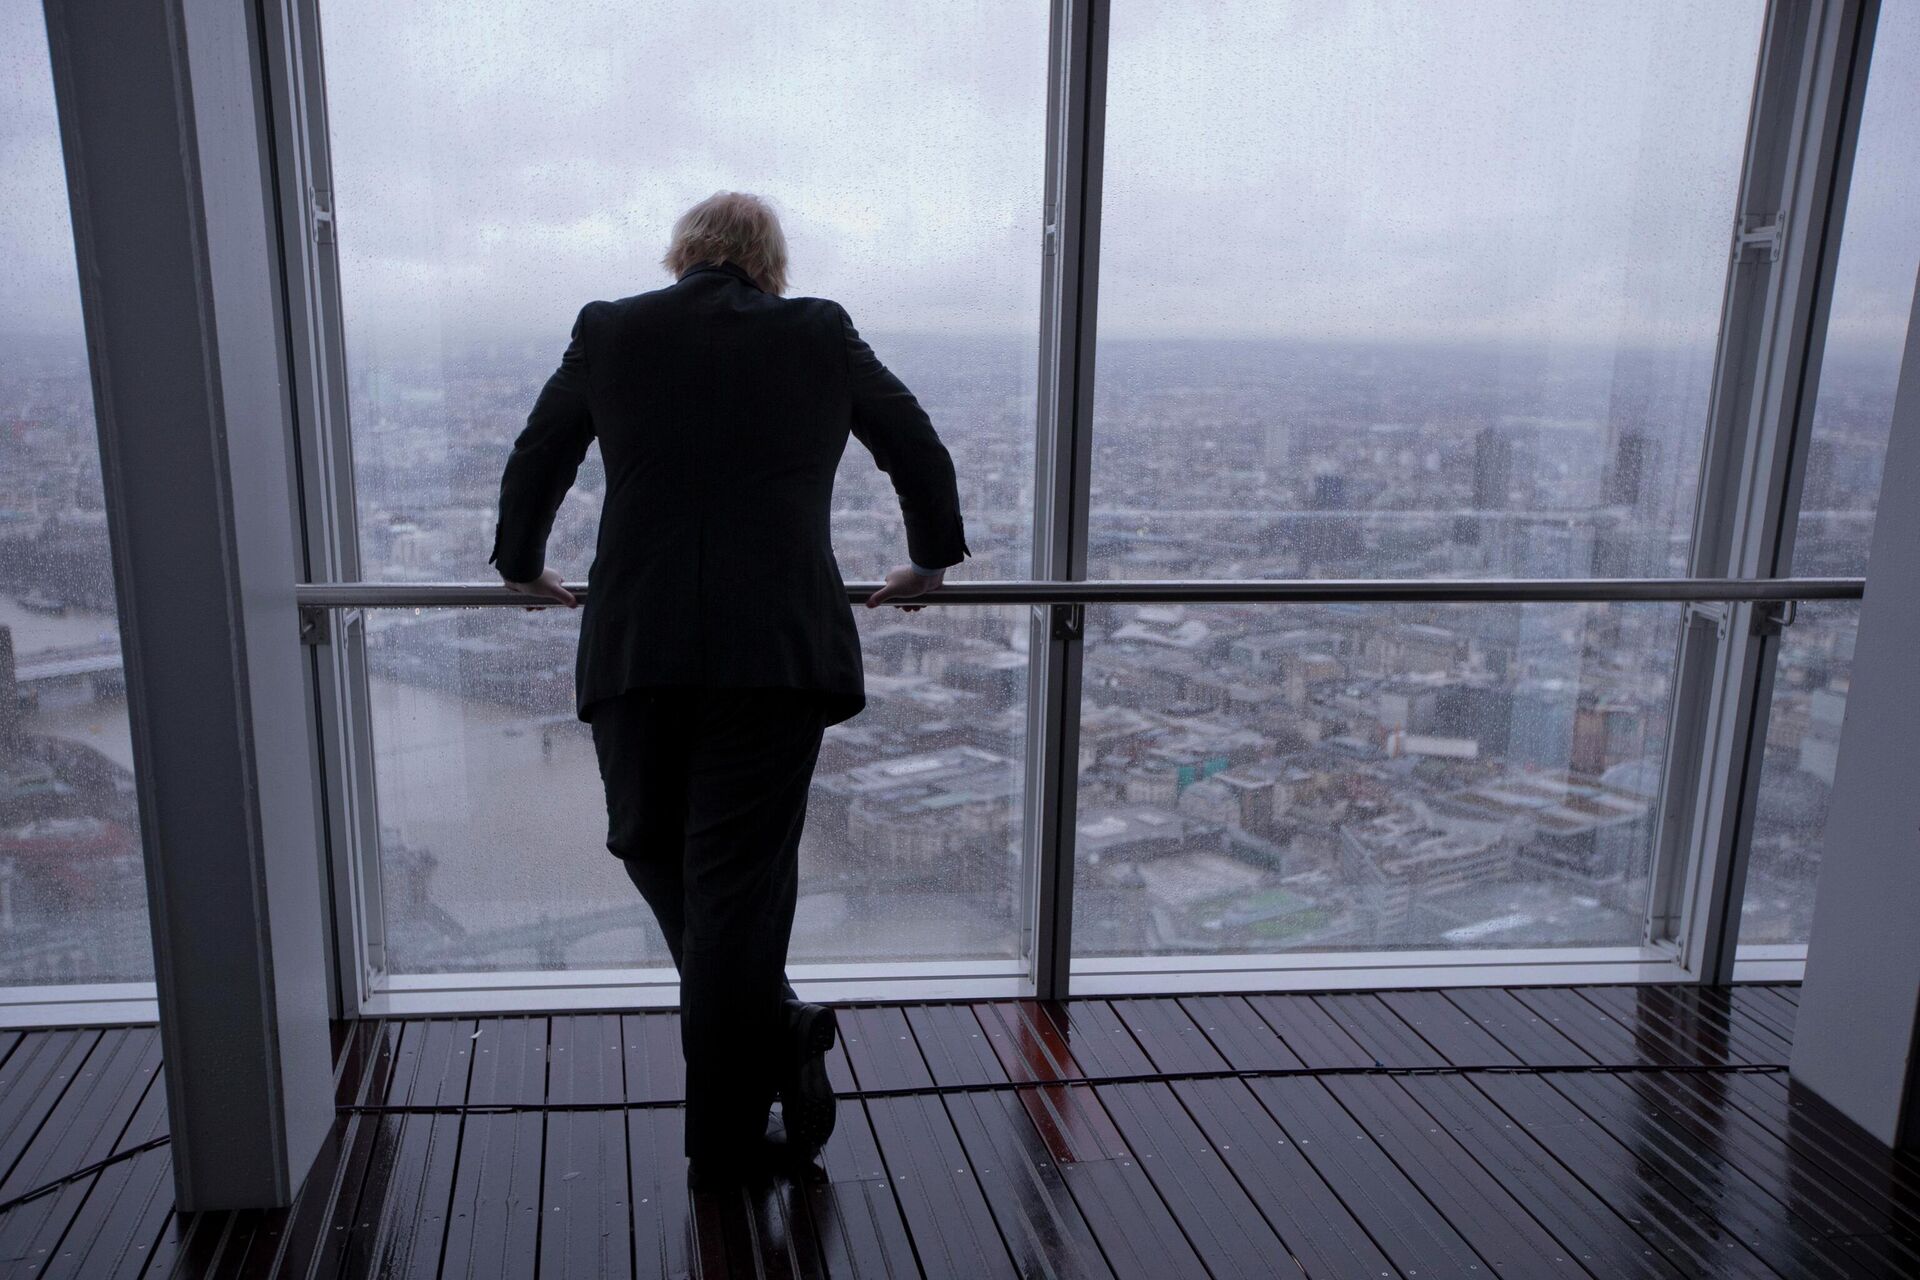  Boris Johnson poses for photographers by looking out at the sights after officially opening The View viewing platform at the Shard skyscraper in London, Friday, Feb. 1, 2013 - Sputnik International, 1920, 05.09.2022